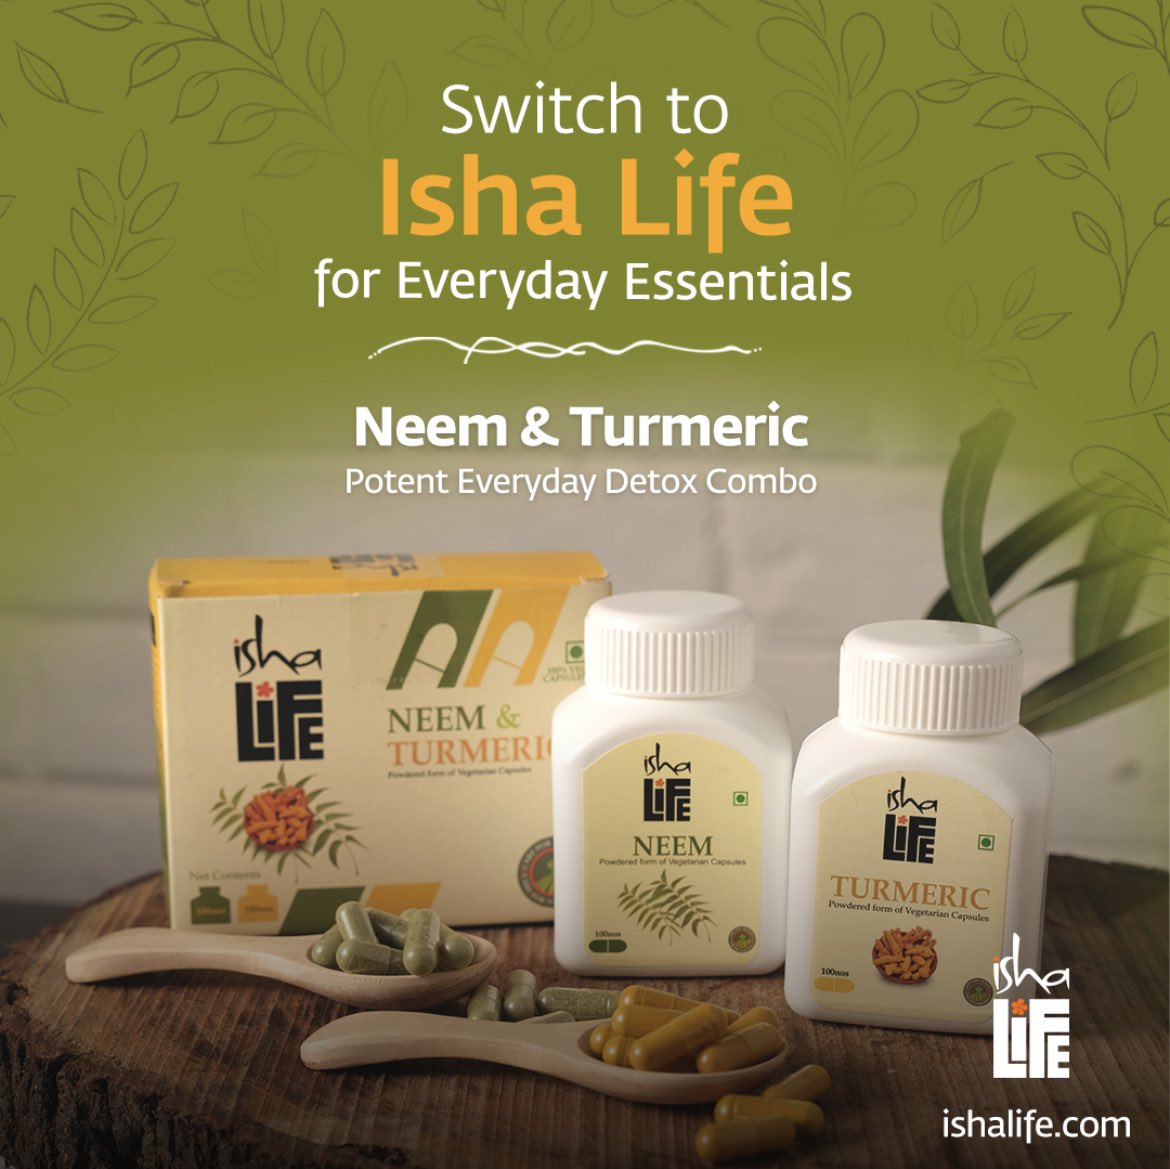 Daily Detox with Neem & Turmeric and Experience true well-being 

Try it for yourself today! 
Link in bio

#detox #wellbeing #healthylifestyles #health #wellnessjourney #wellness #detoxify #detoxifying #toxinsout #toxins #siddhamedicines #ishalife